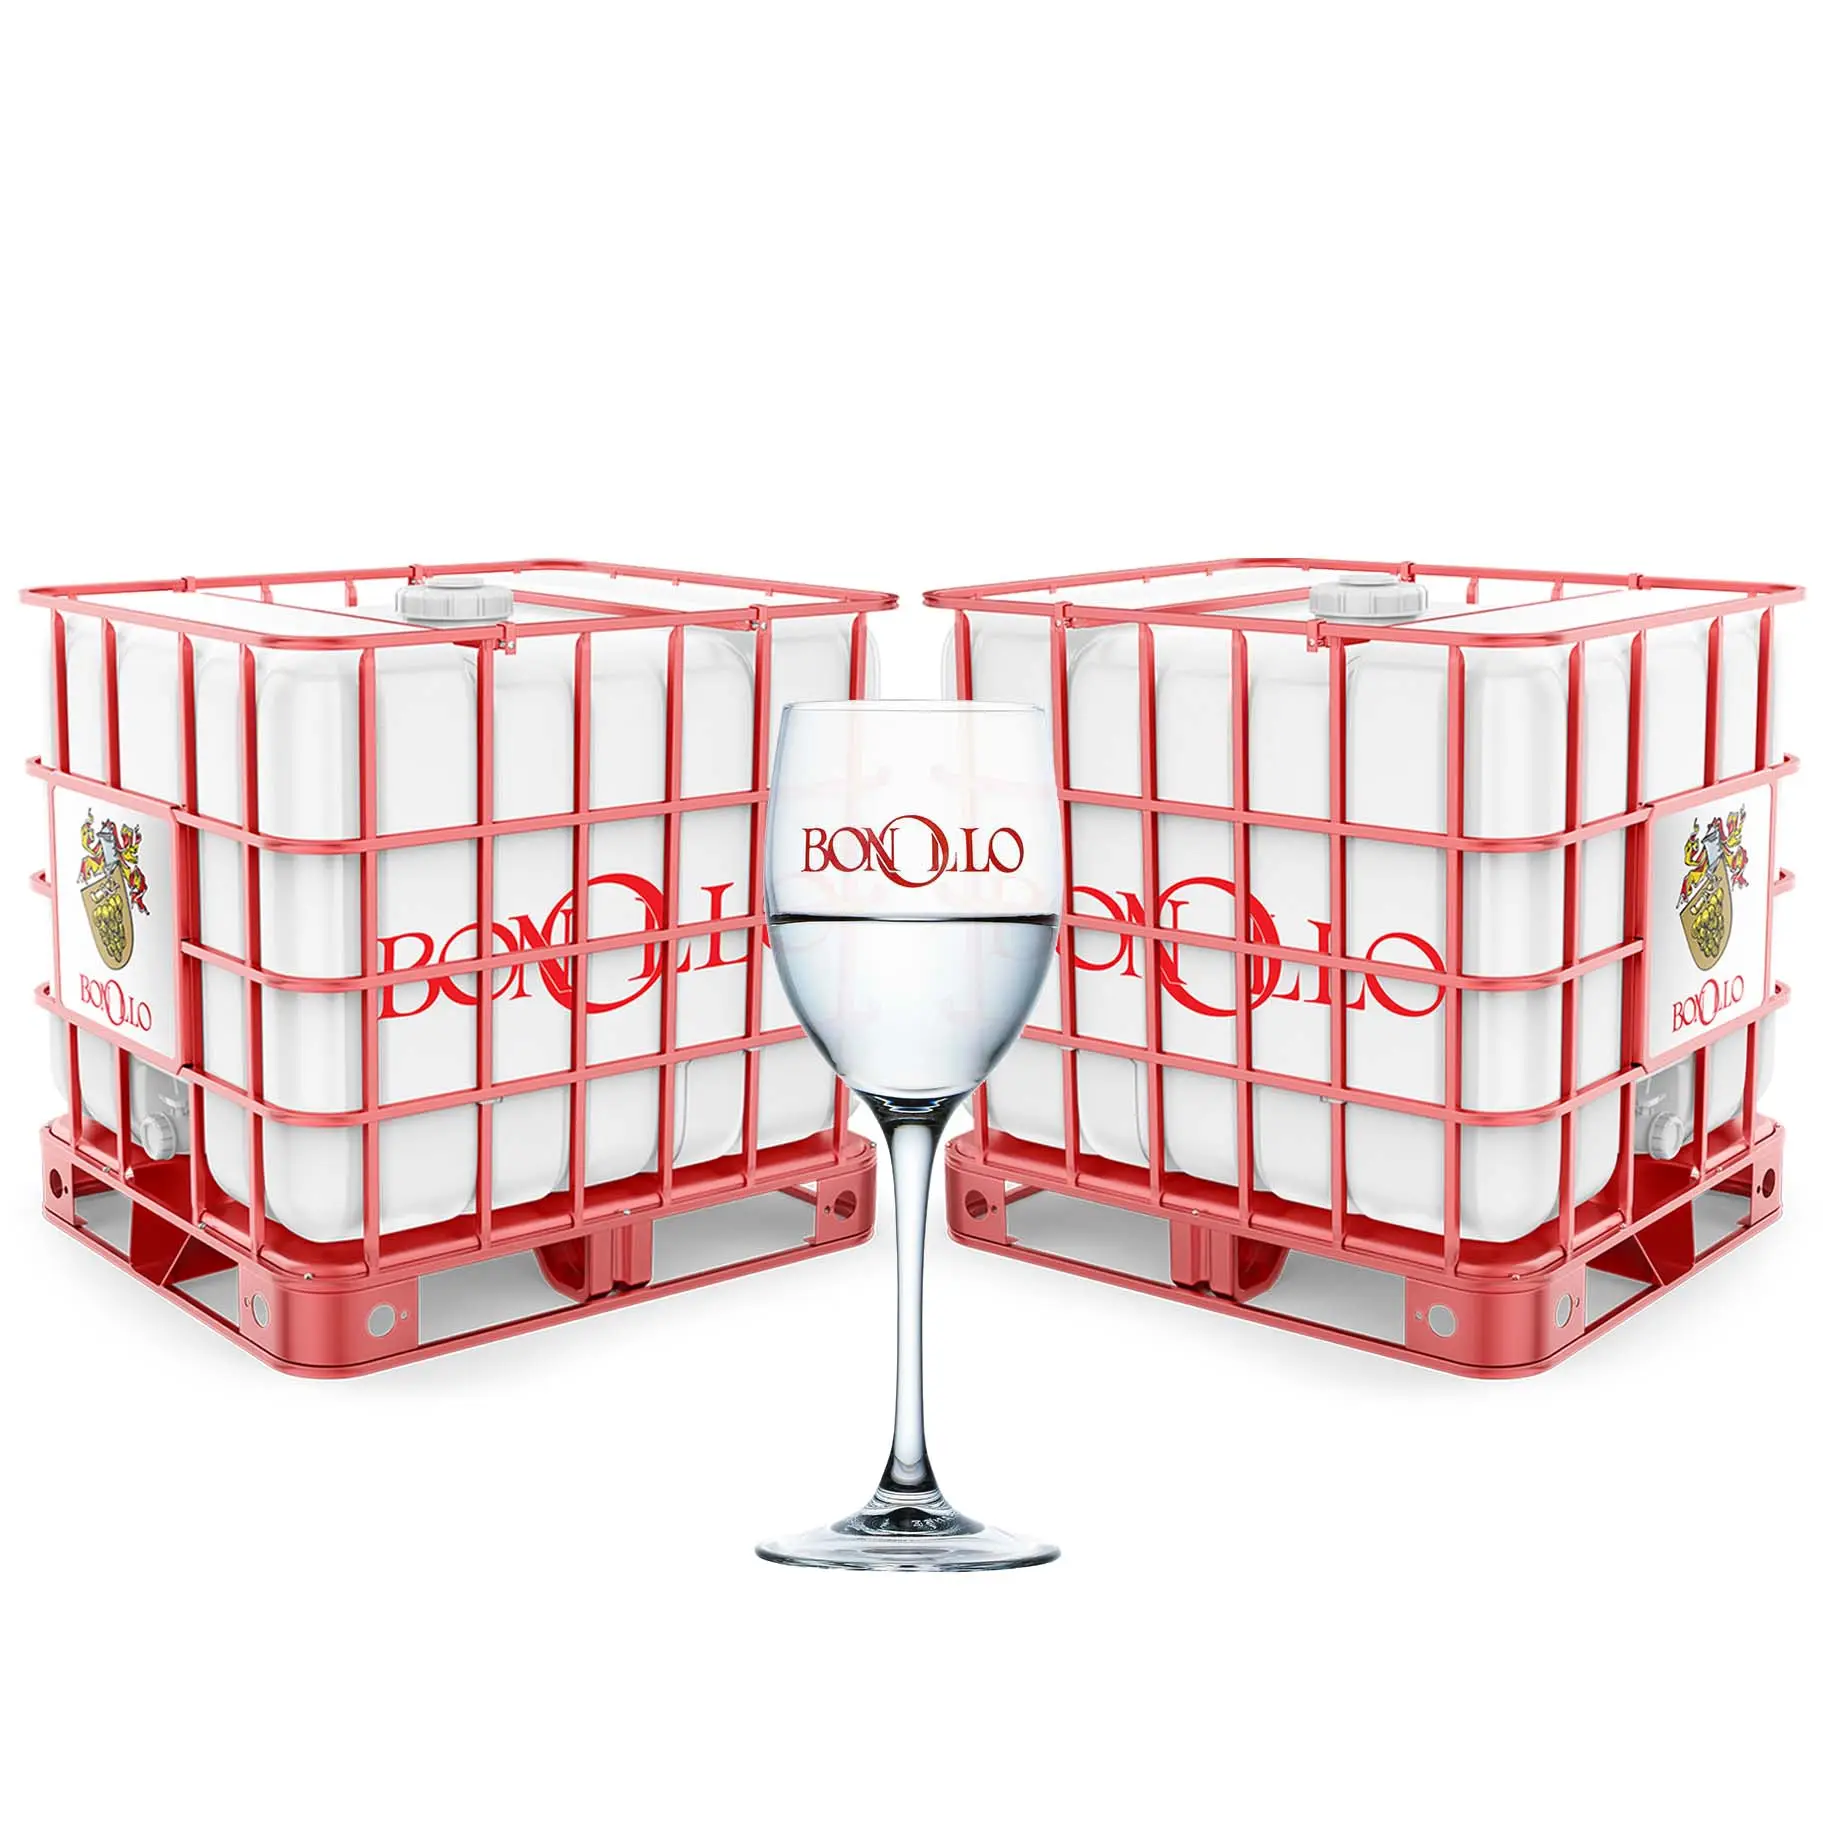 FINE QUALITY FRESH WINE DISTILLATE MADE IN ITALY SHIPPED IN BULK AT  FULL ALCOHOL CONTENT